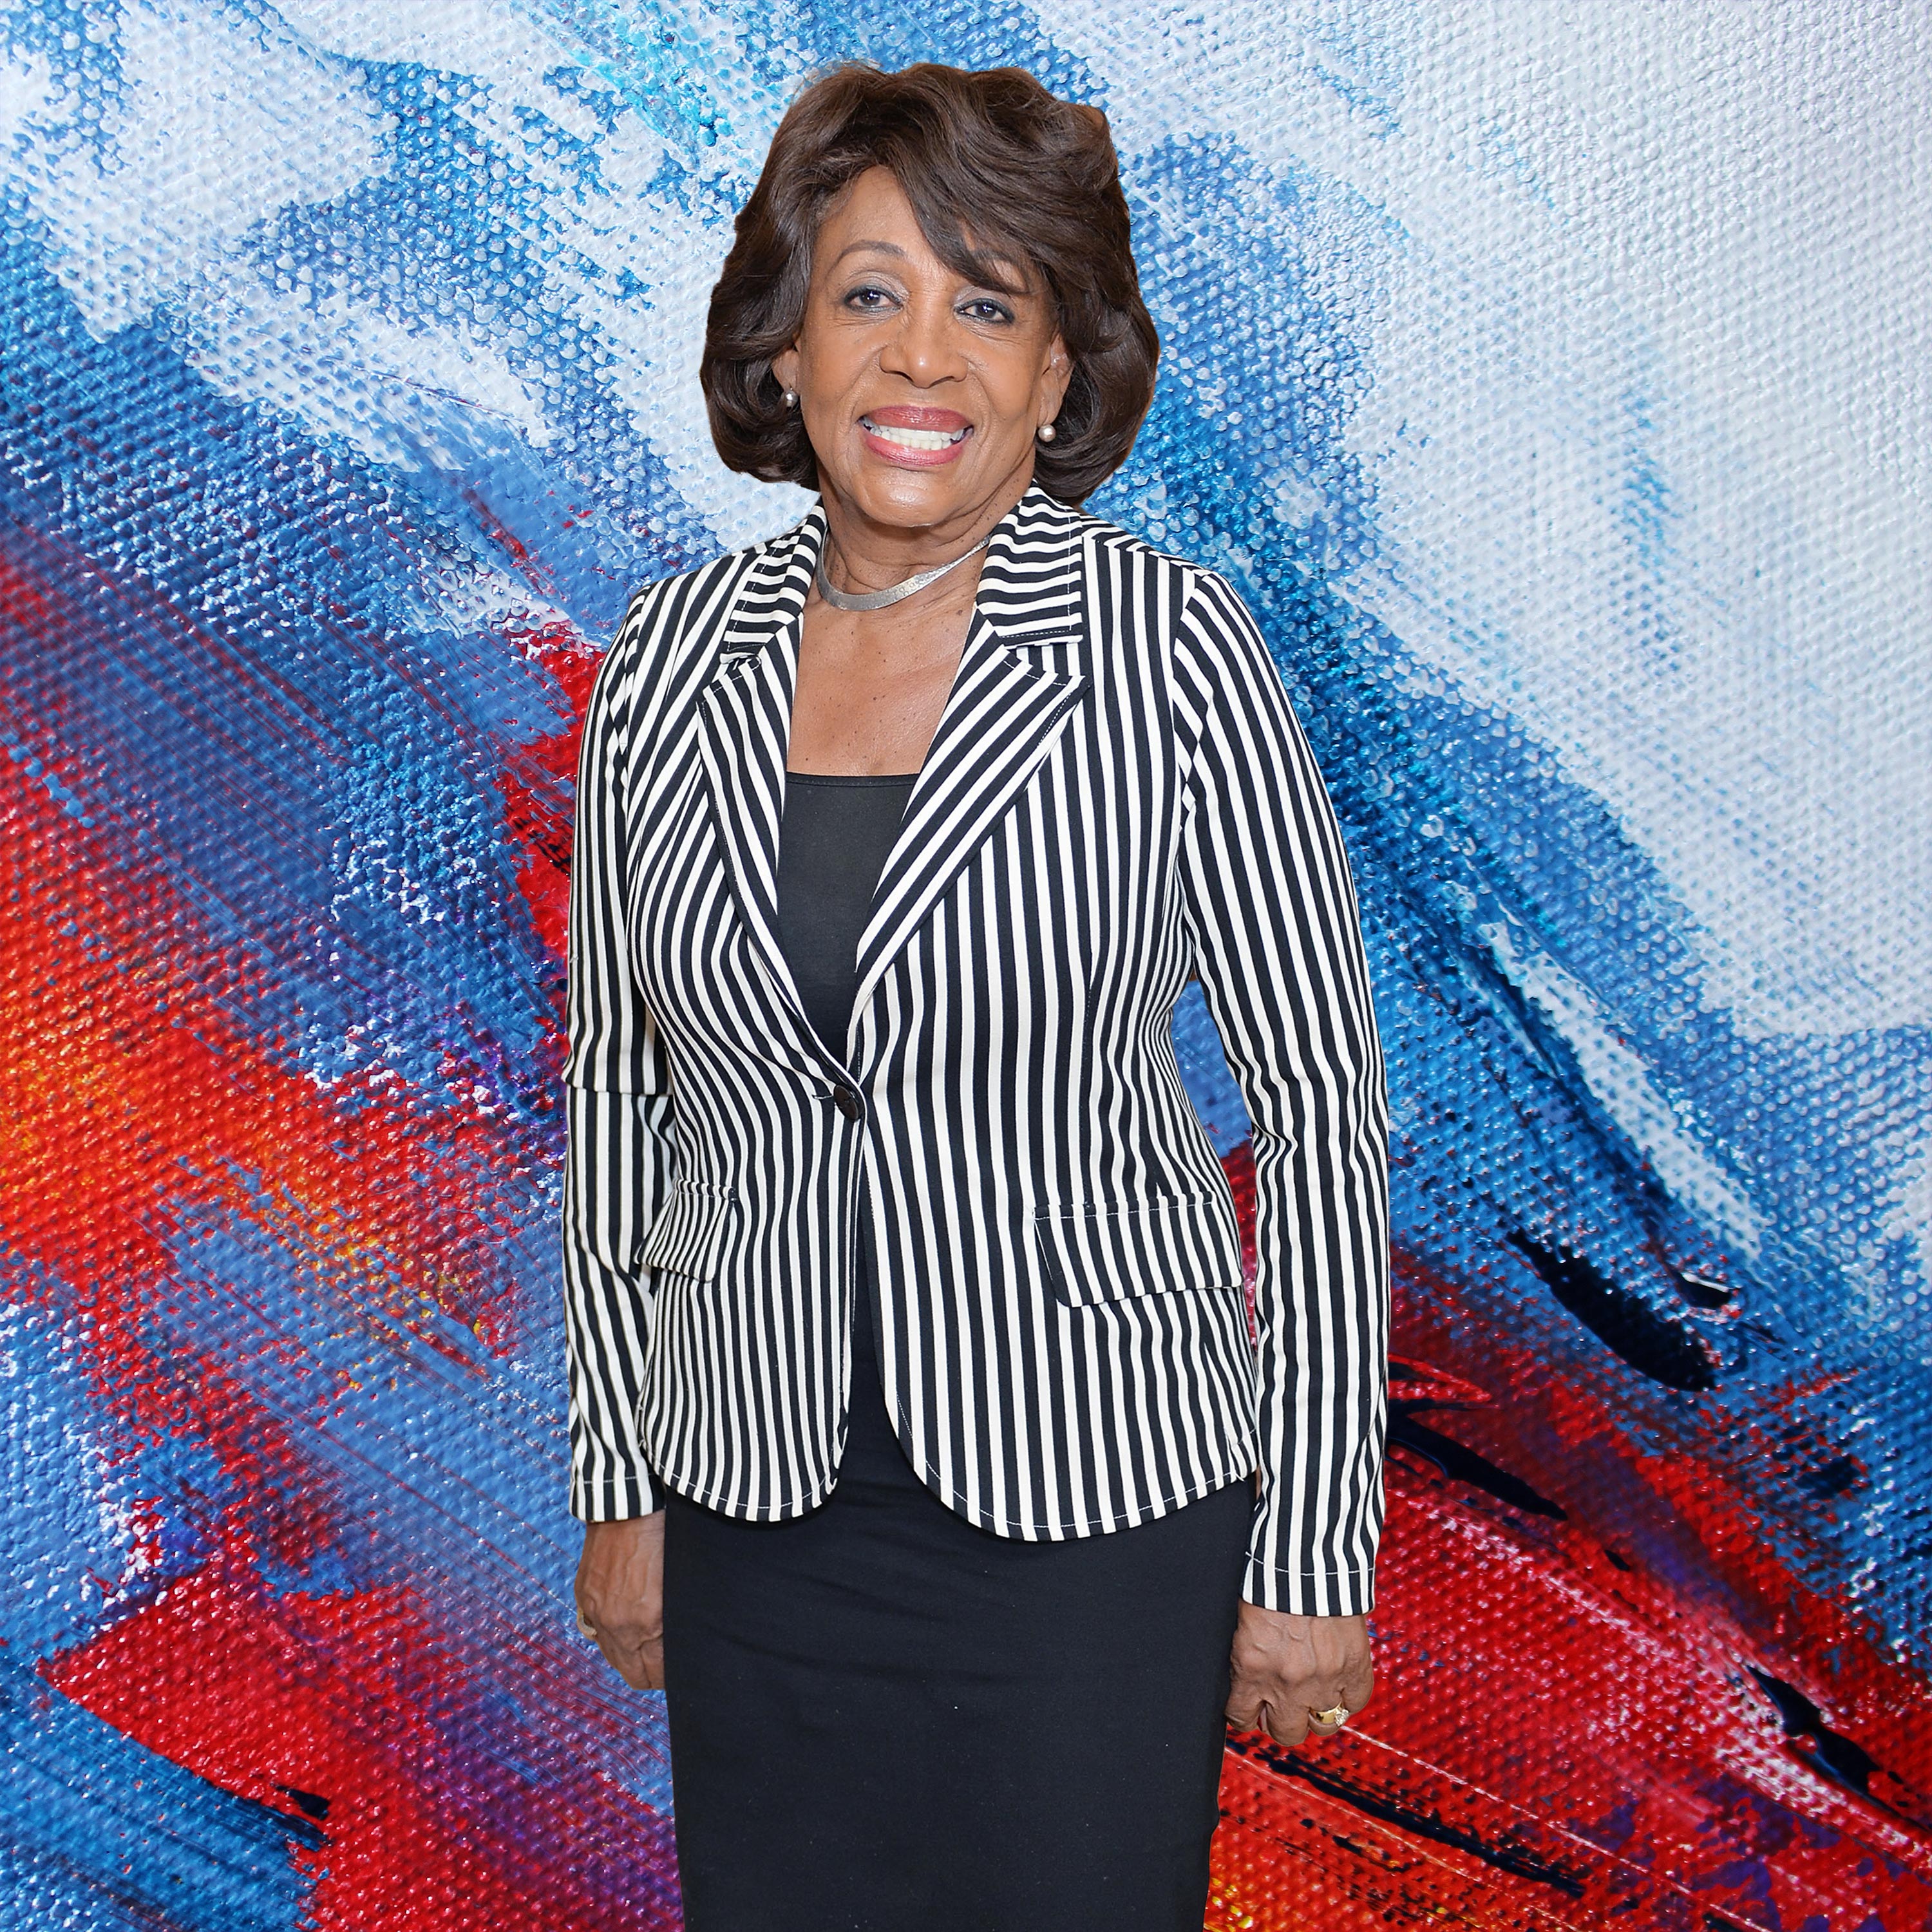 Maxine Waters Talks Shade, Receipts And Serving A Little Tea
